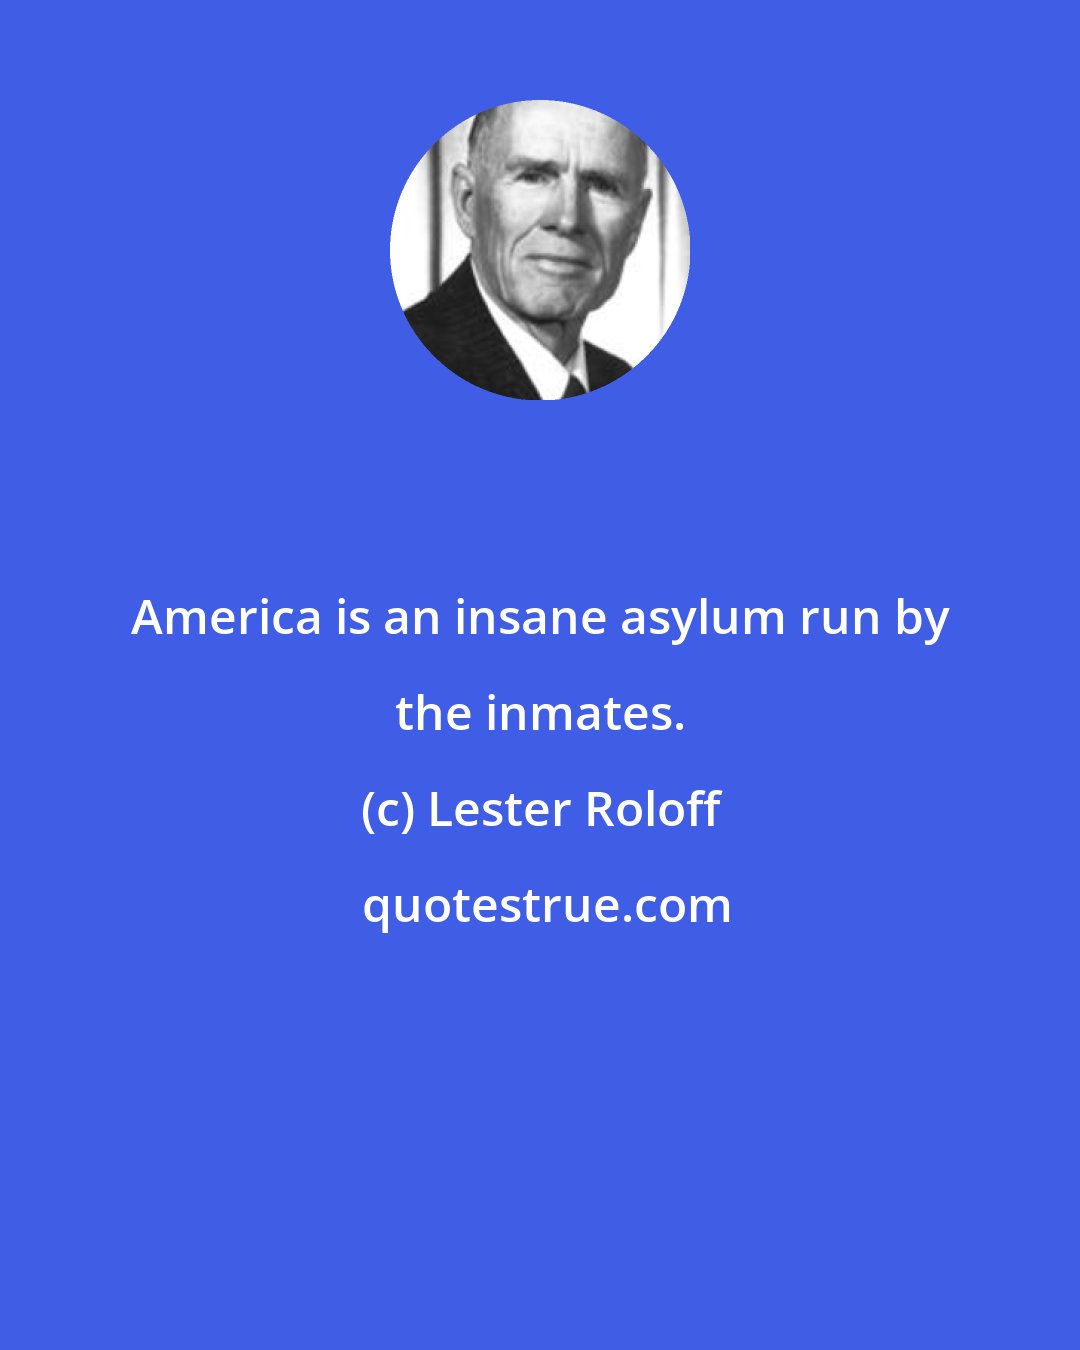 Lester Roloff: America is an insane asylum run by the inmates.